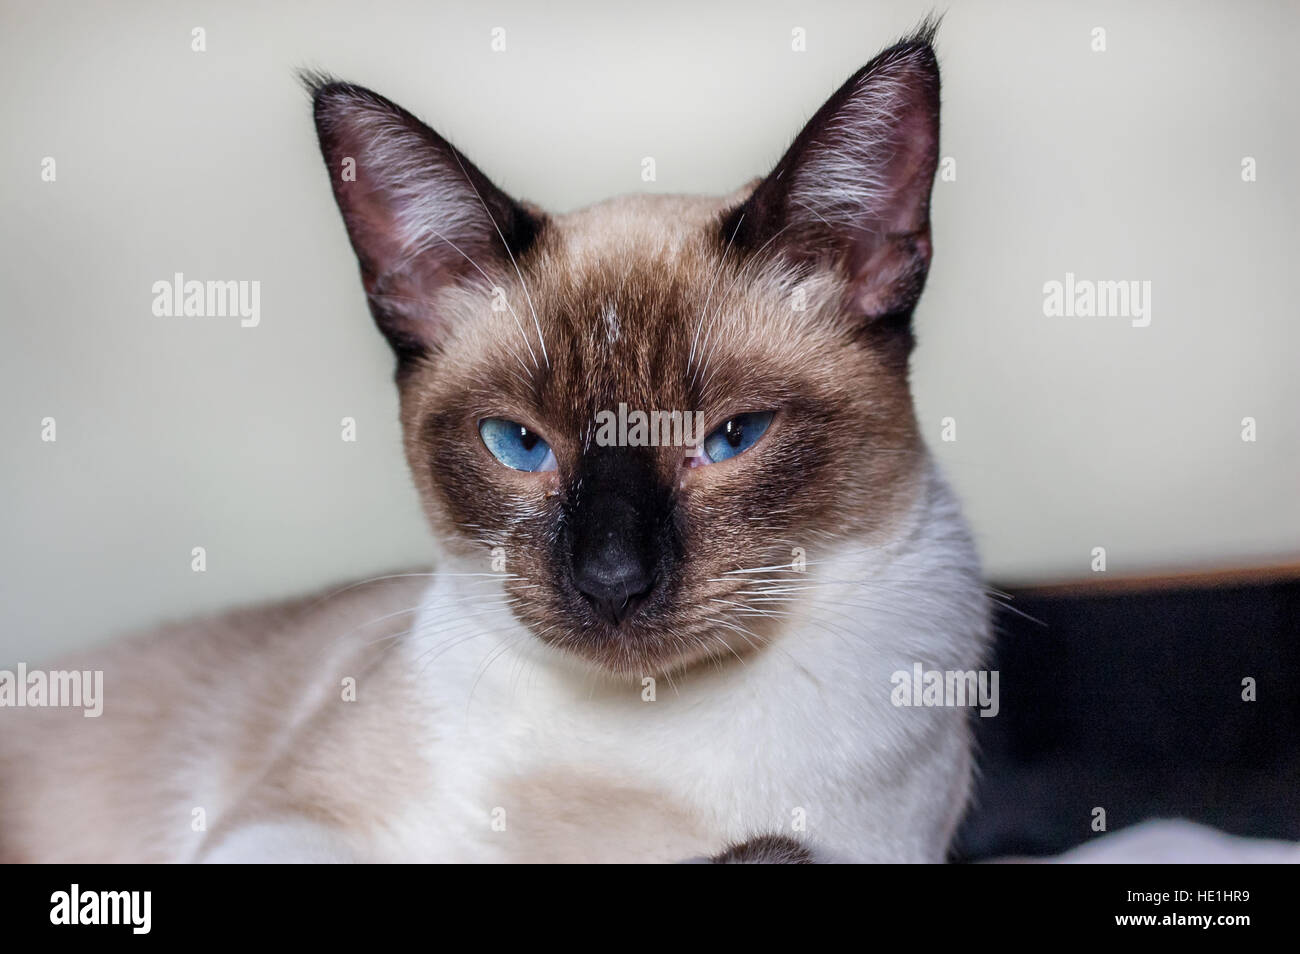 Grumpy cat looking at the camera portrait Stock Photo